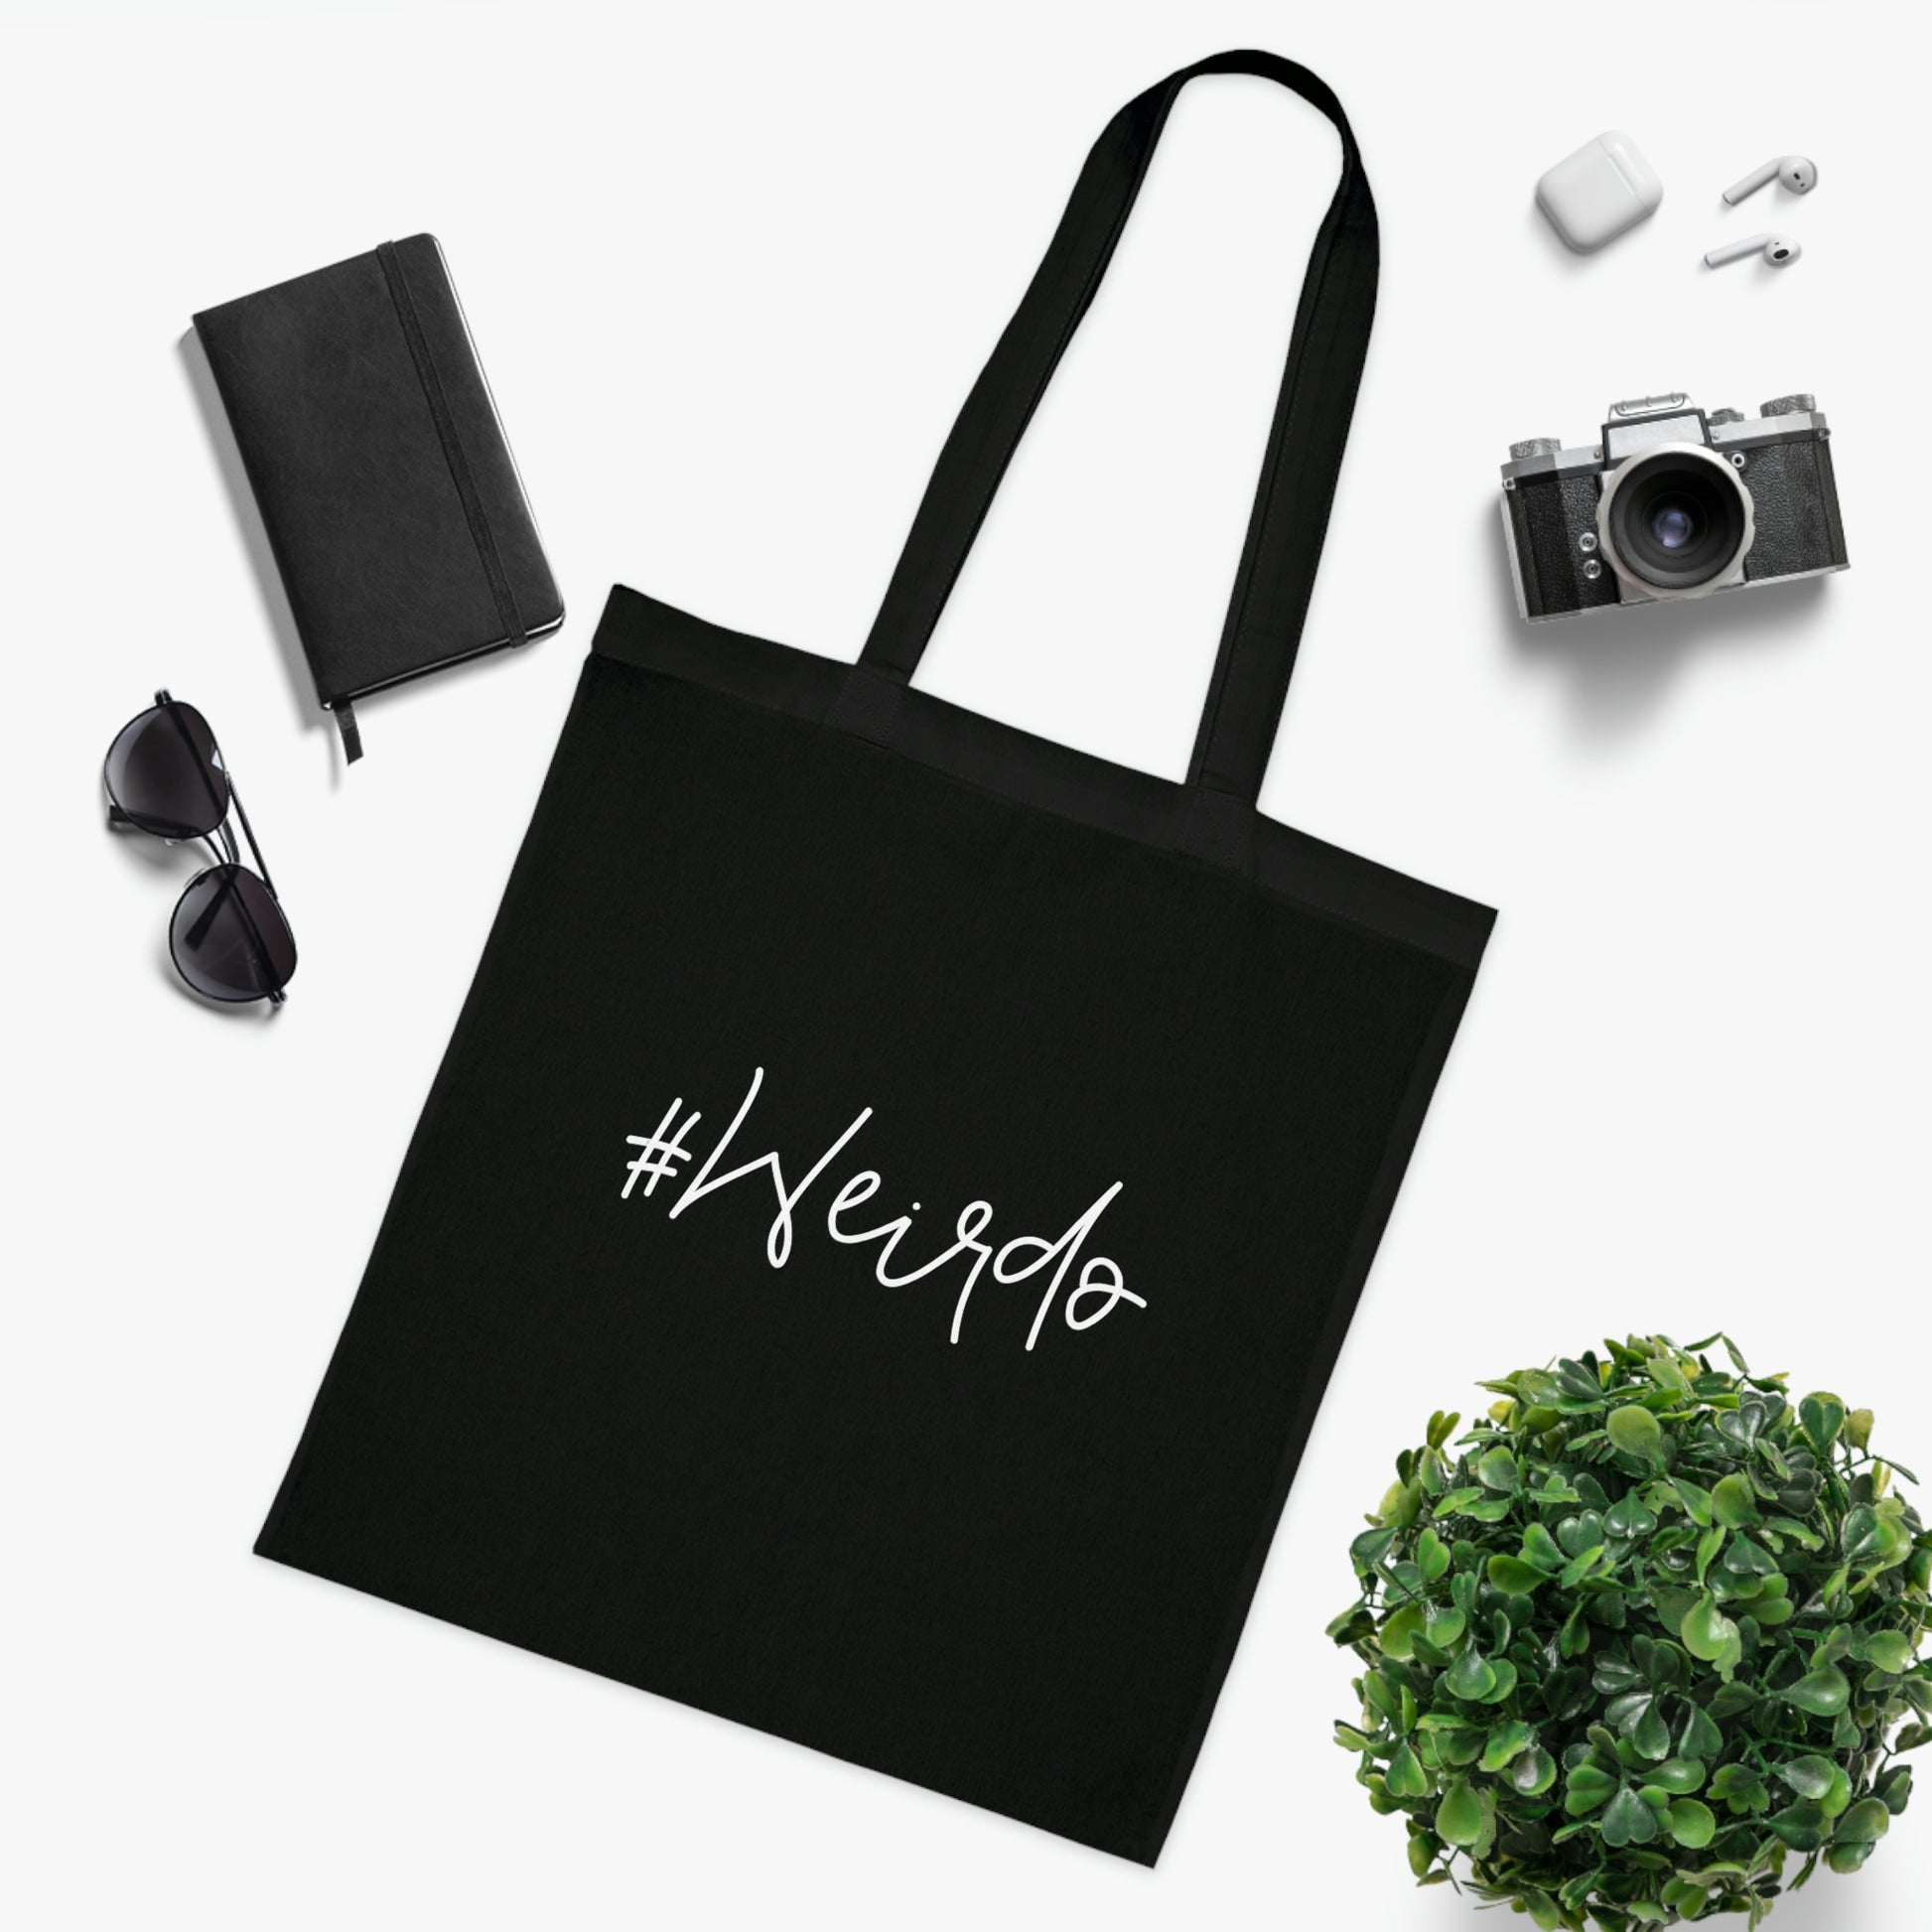 Weirdo | Basic but weird shopping bag. Black tote bag, 100% cotton with our #Weirdo meme printed at the front in white letters.